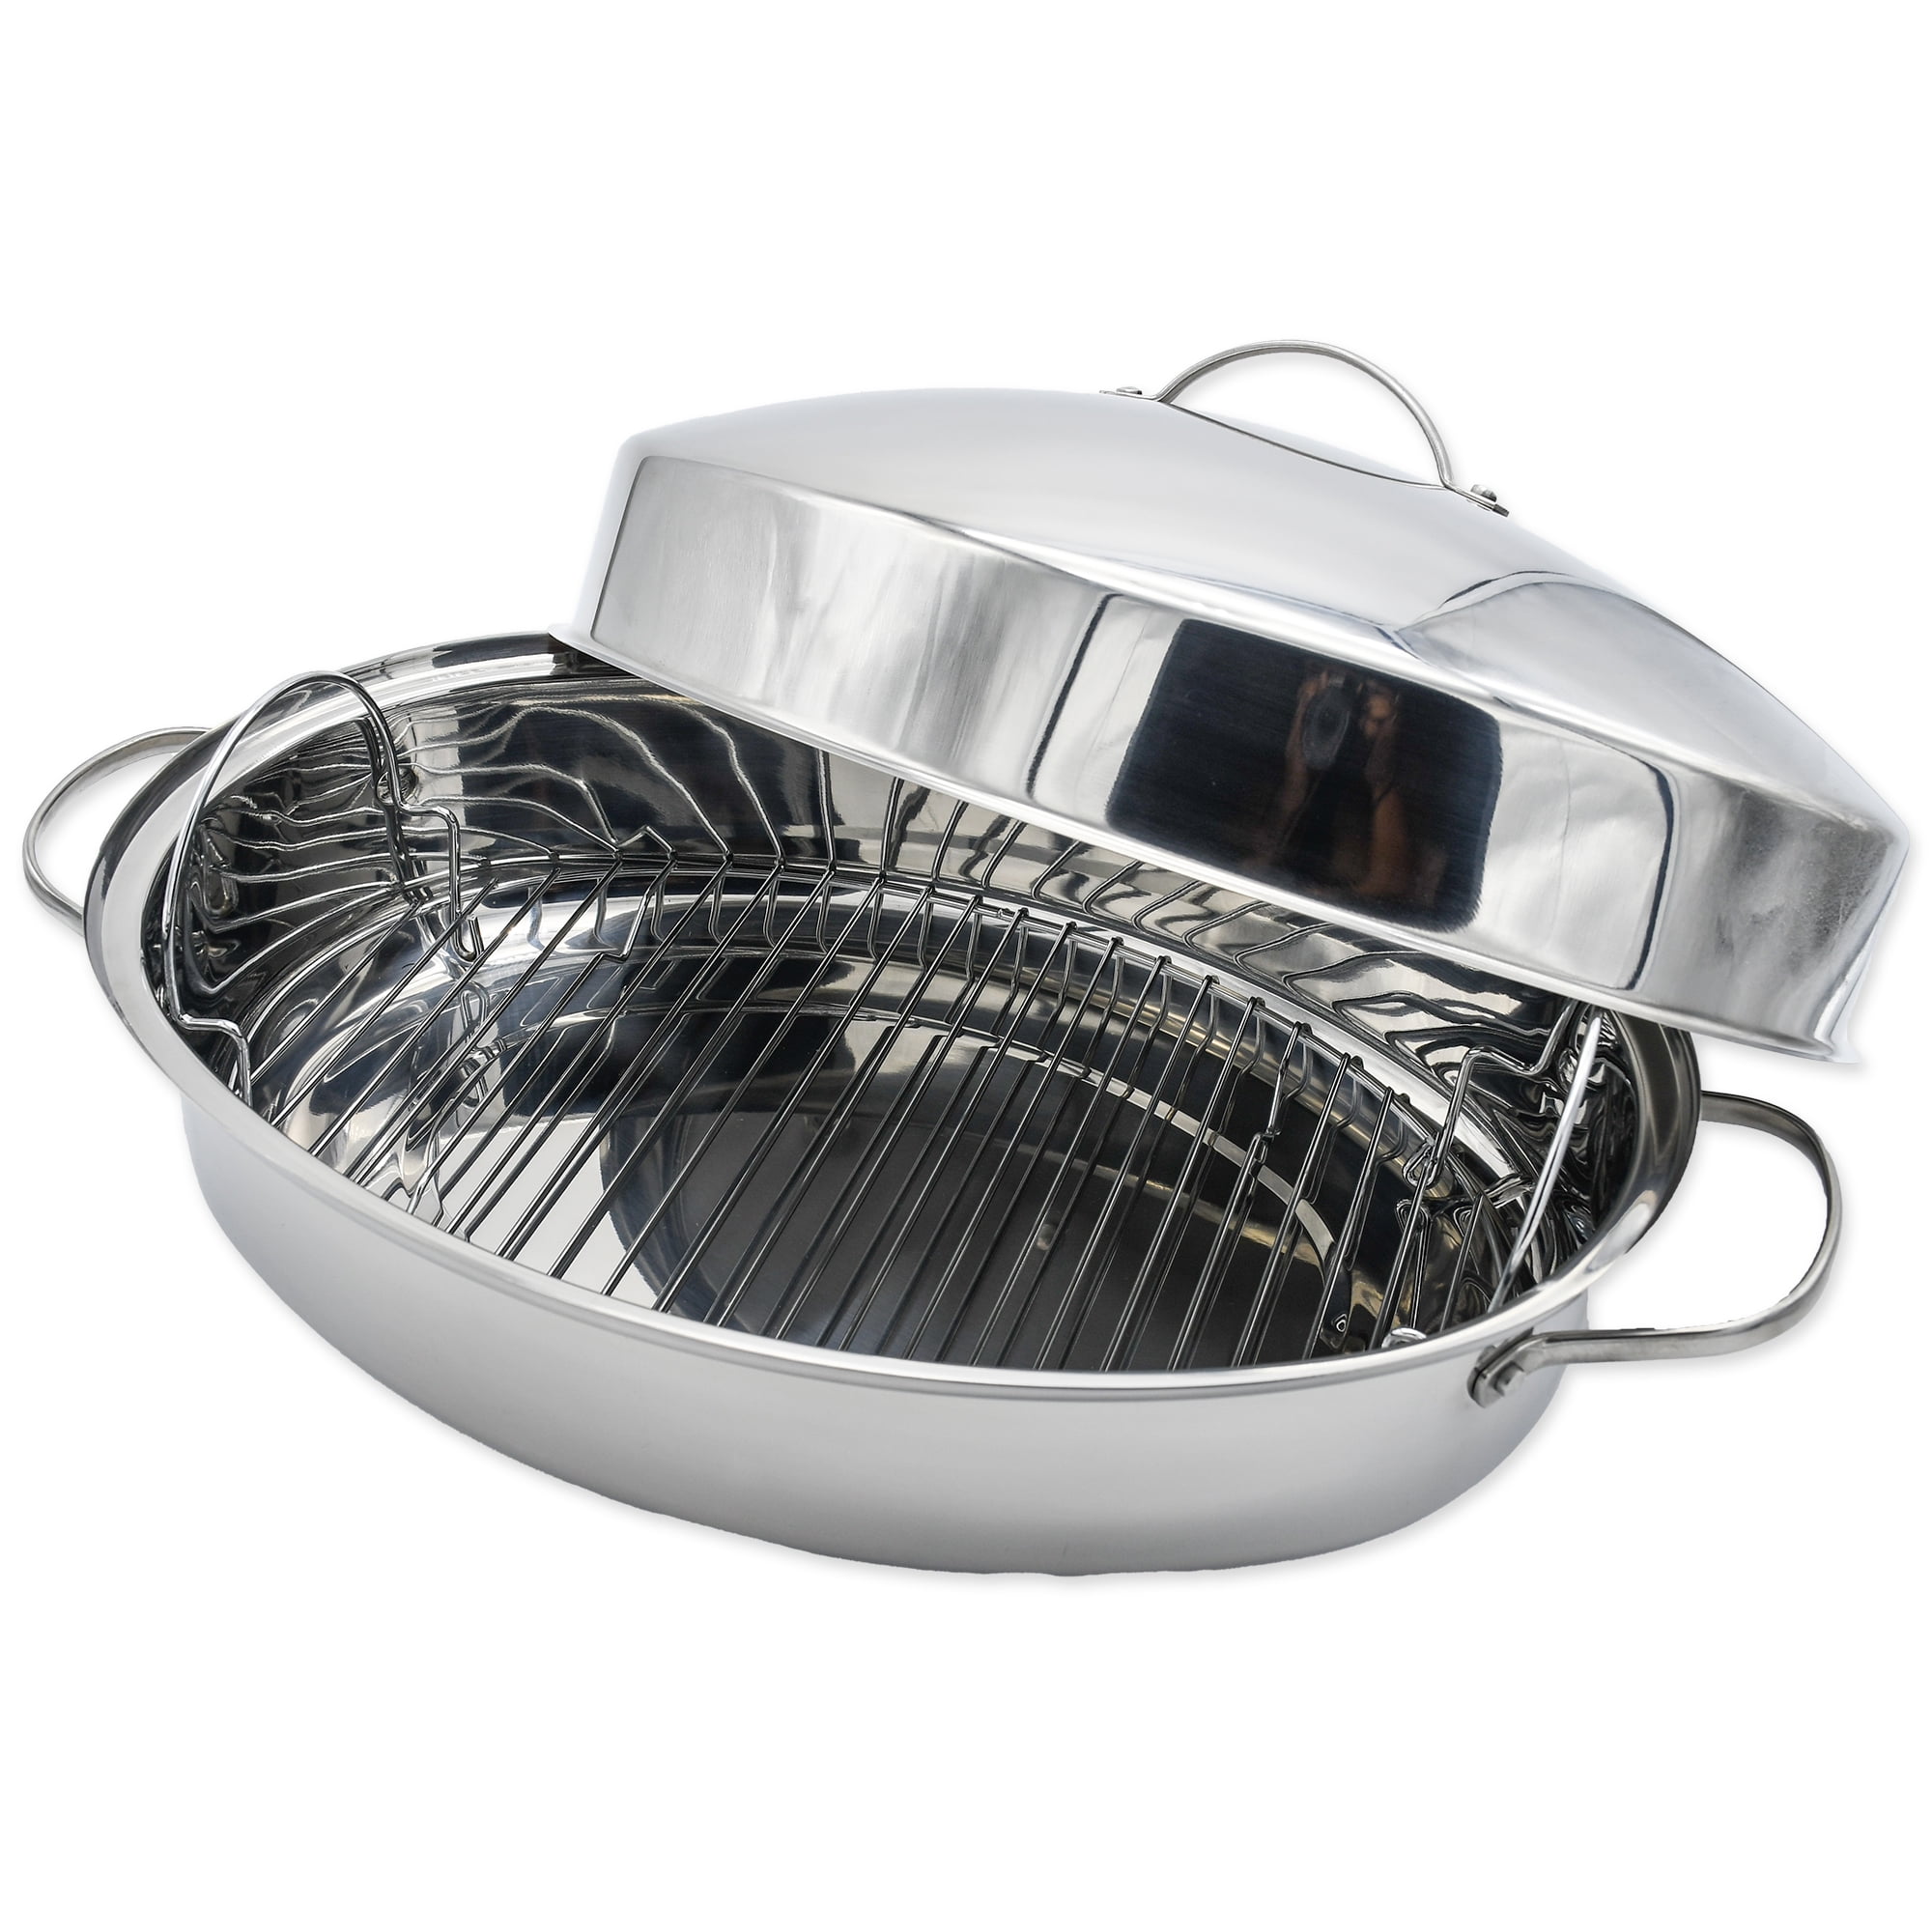 Broiling Rack HIC Oval Wire Roasting Baking Food Storage Cookware Cooking Tool 